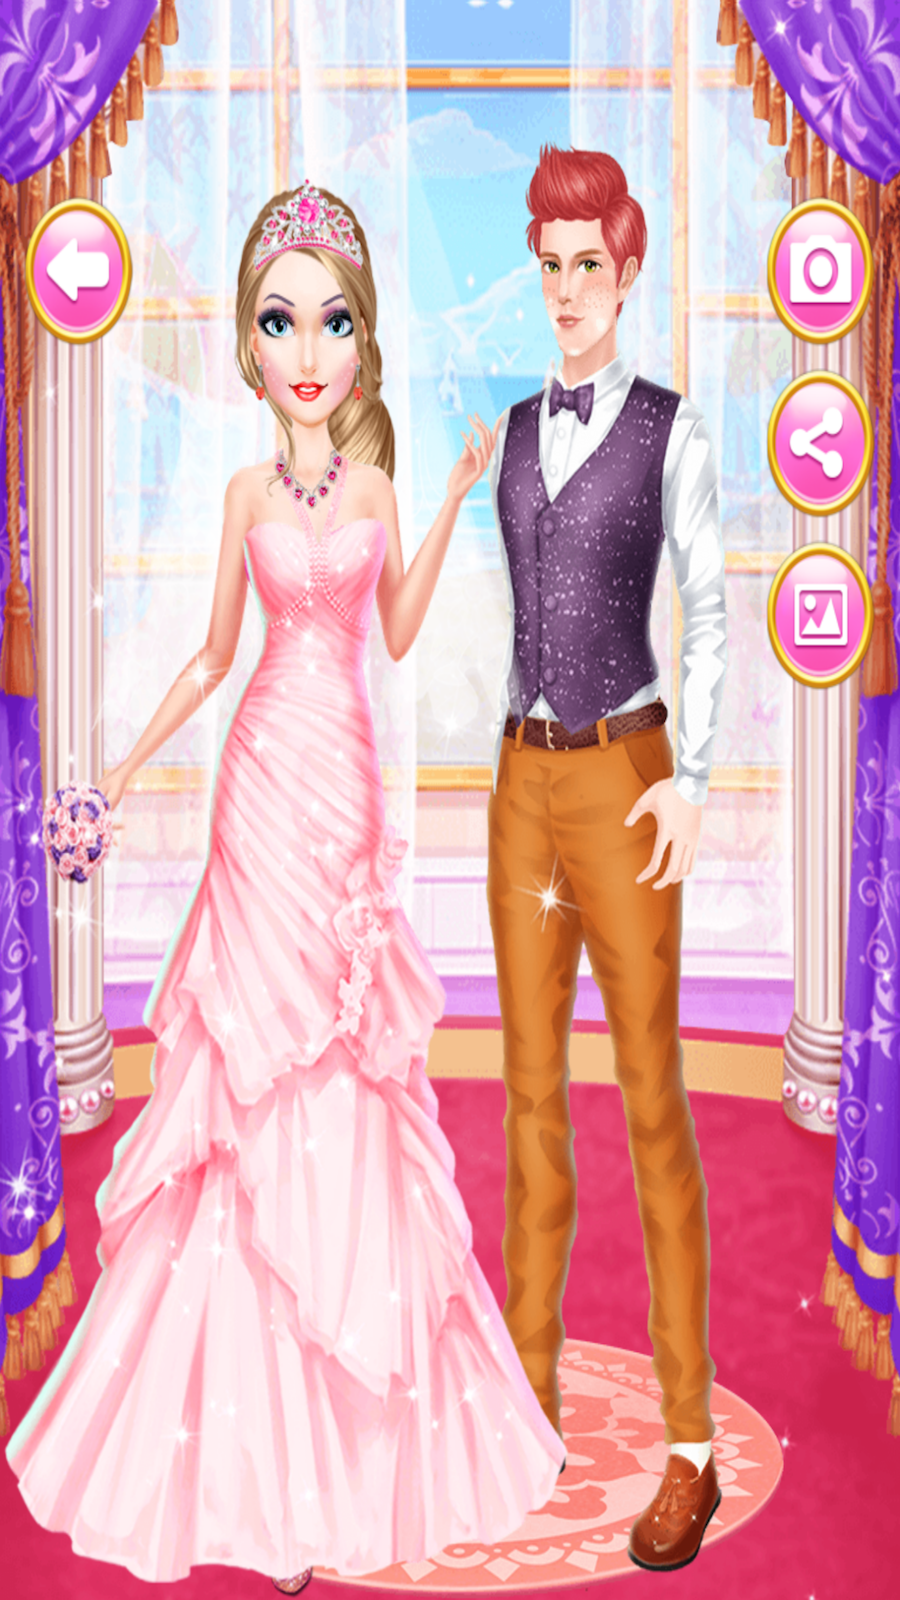 Wedding Princess Salon Dress Up Game For Kids + Ready For Publish ...